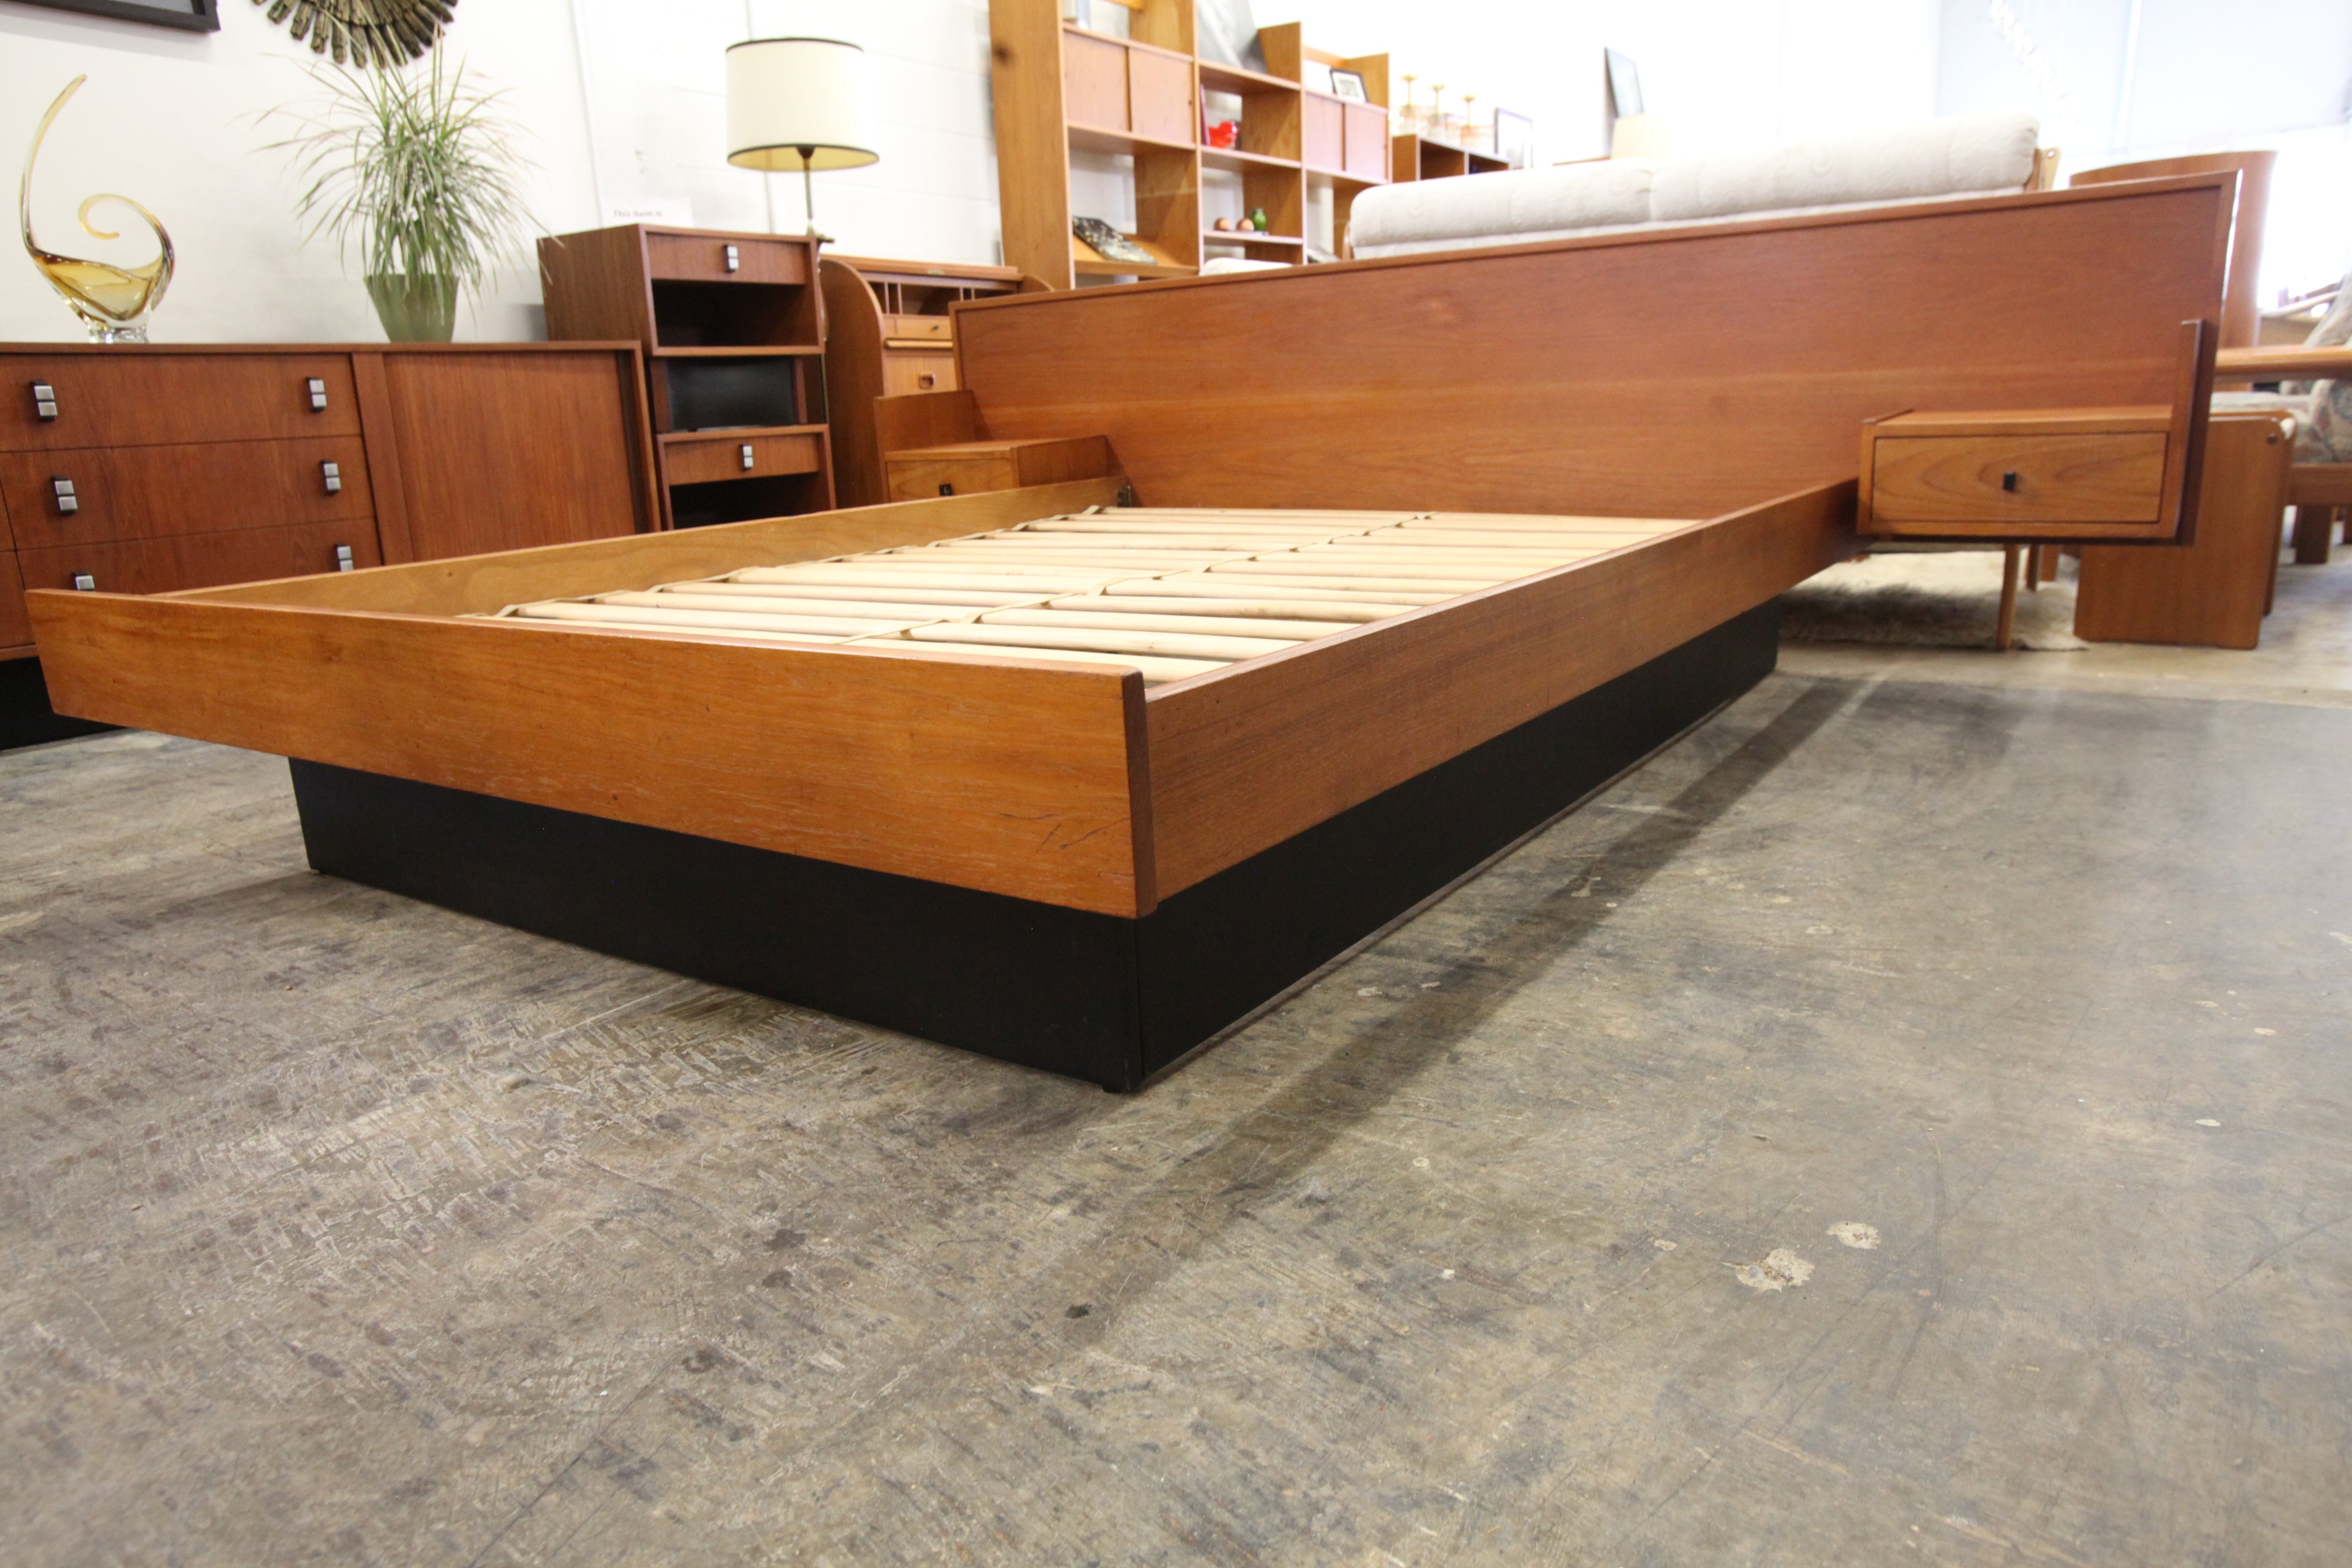 Vintage Teak Queen Size Bed w/ Floating Night Stands (97"W x 29.75"H x 82.5"D)